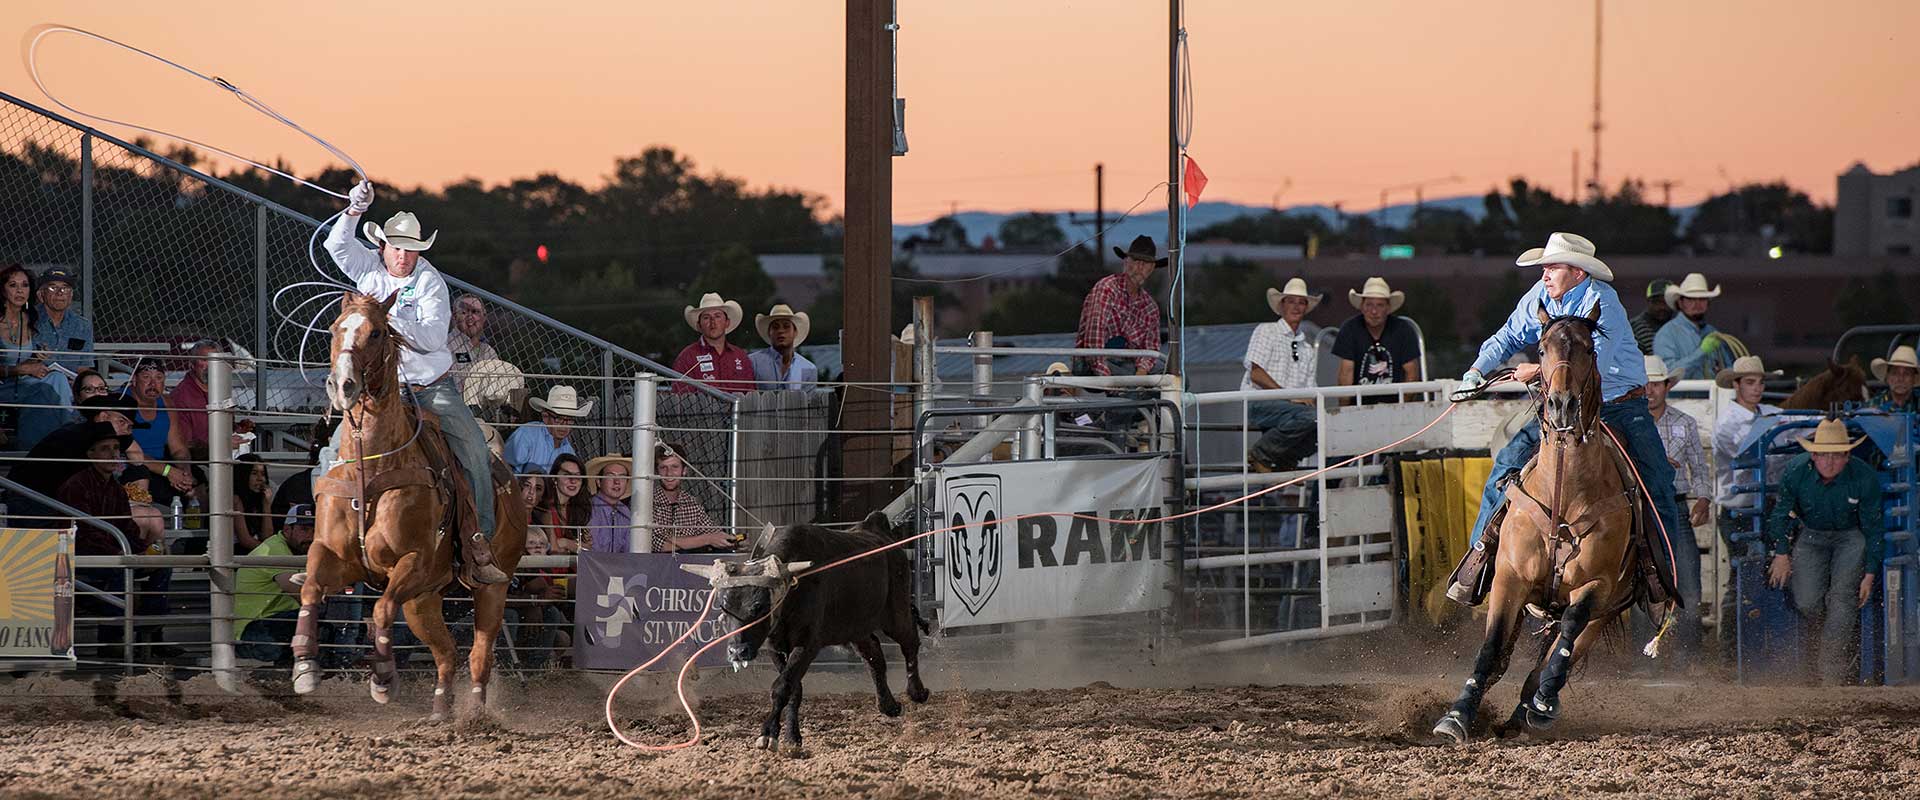 Cattle roping at the Rodeo de Santa Fe